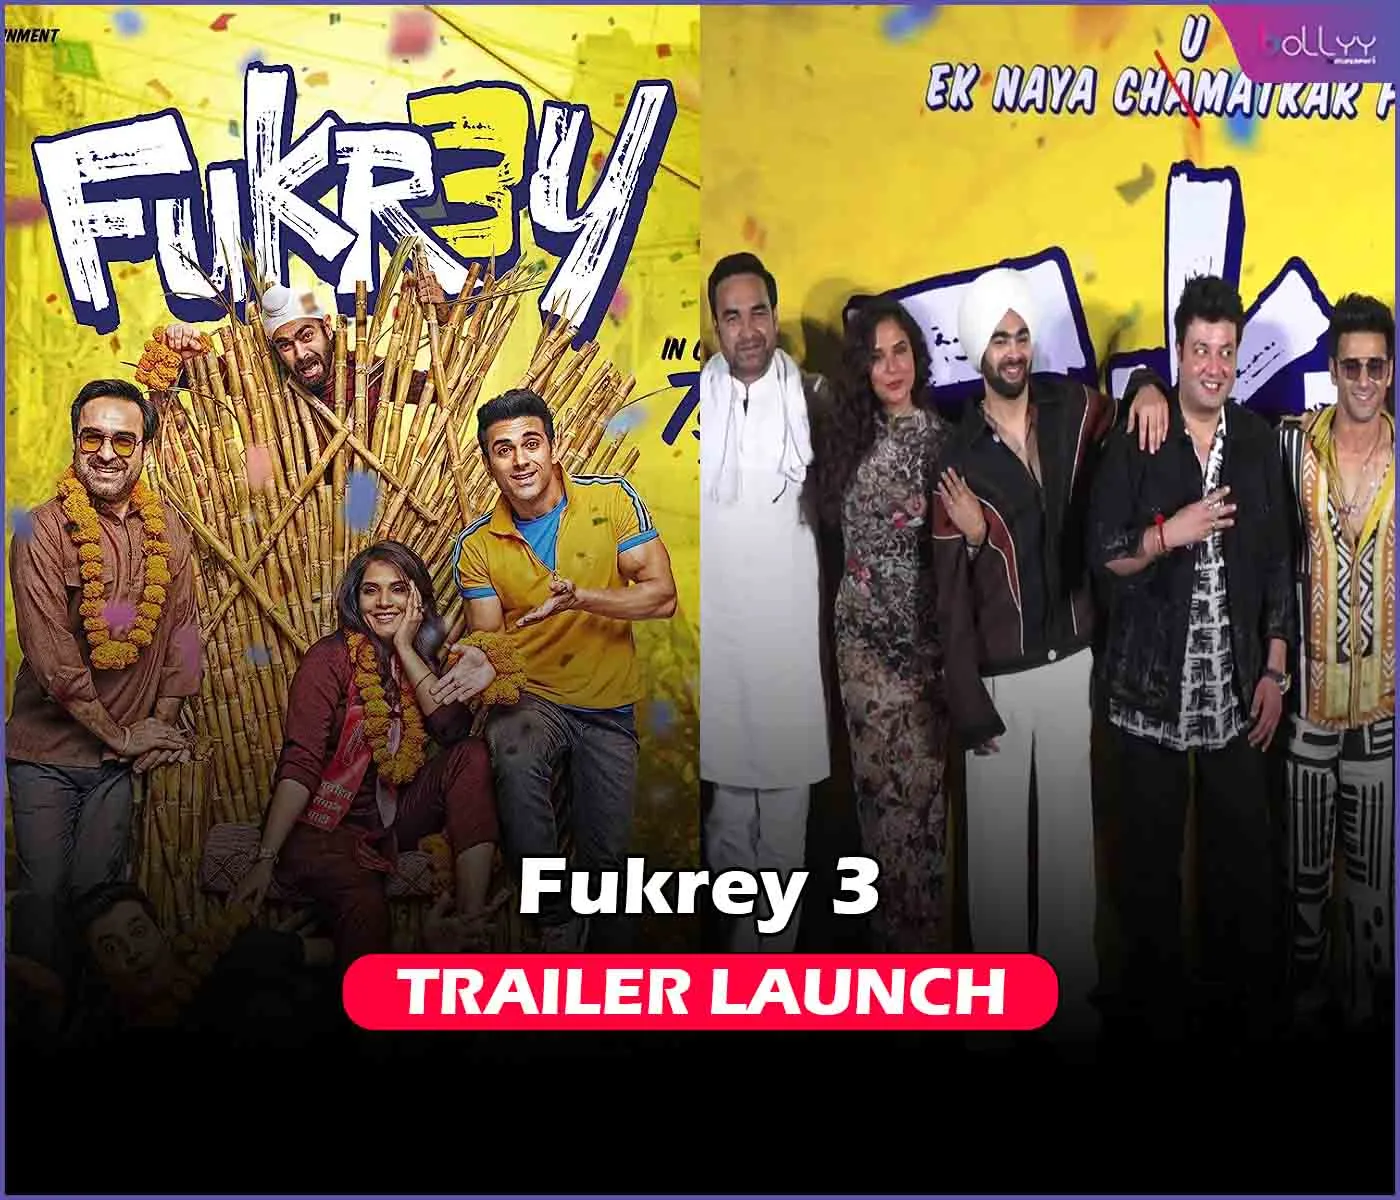 Fukrey 3 trailer launched